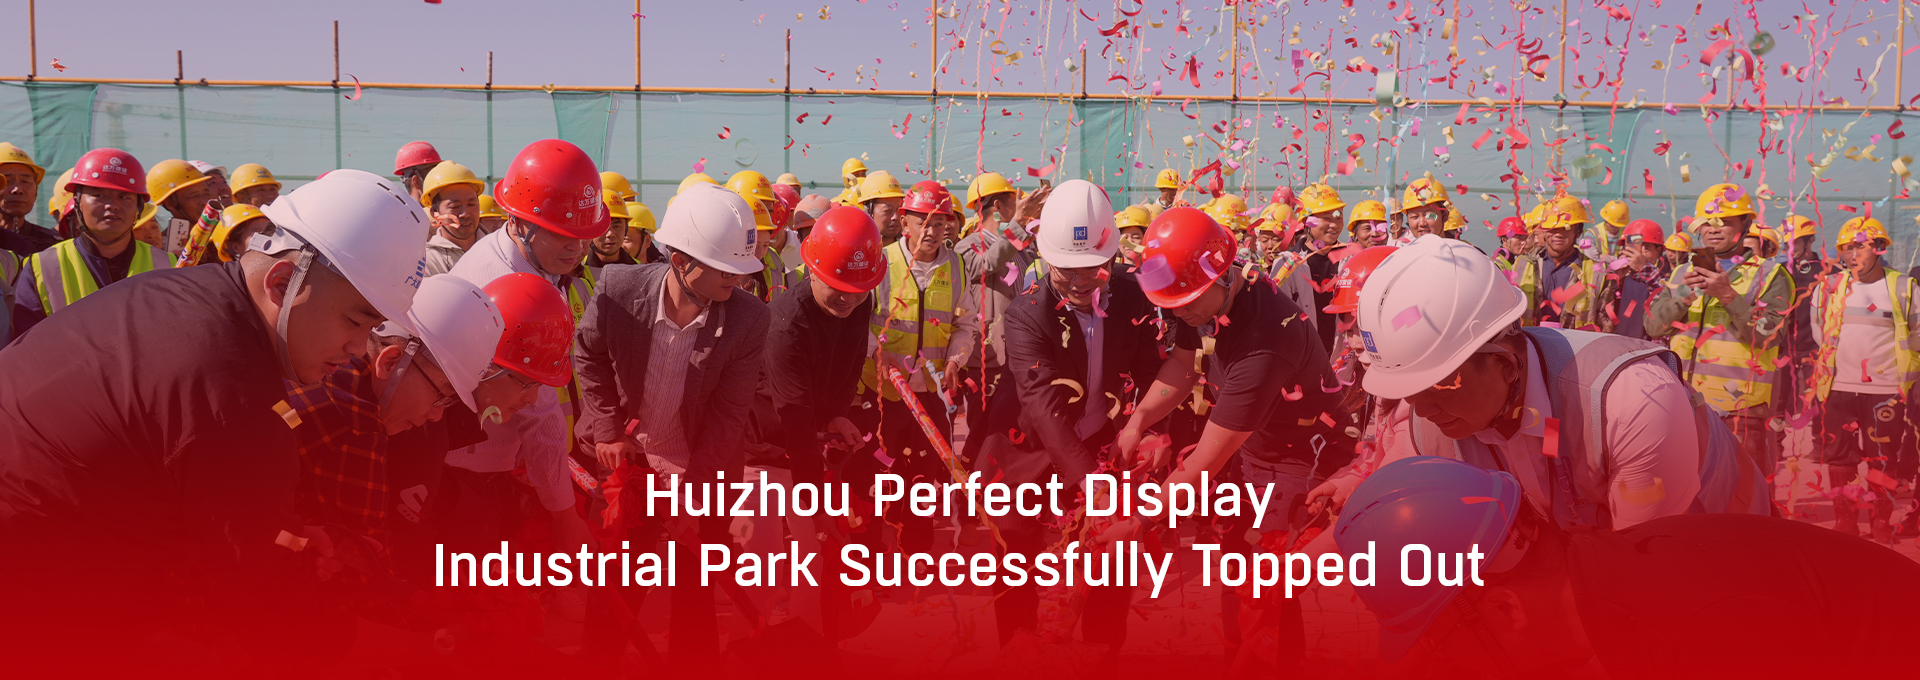 Huizhou Perfect Display Industrial Park Successfully Topped-out